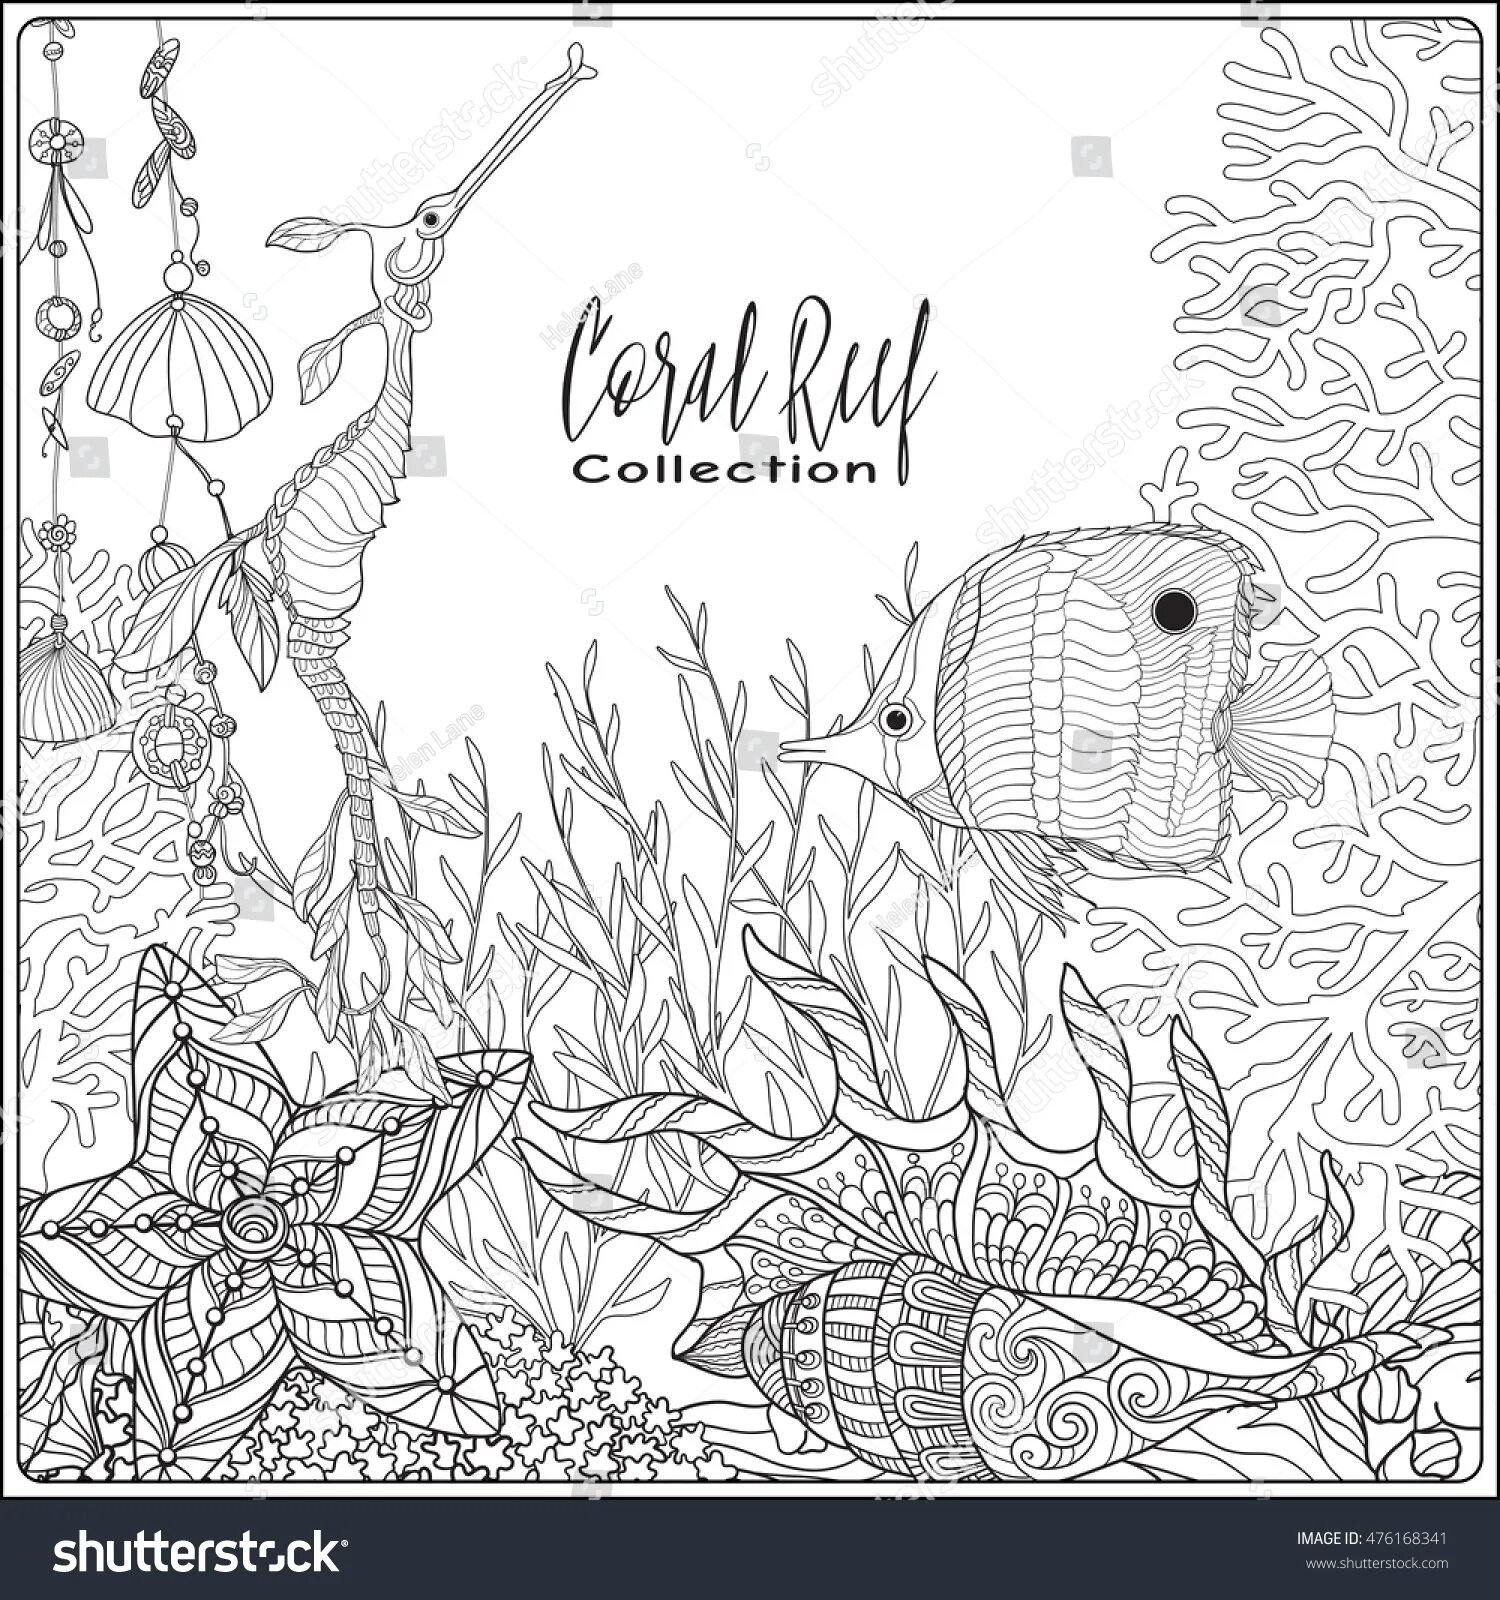 Coloring book luxury coral reef